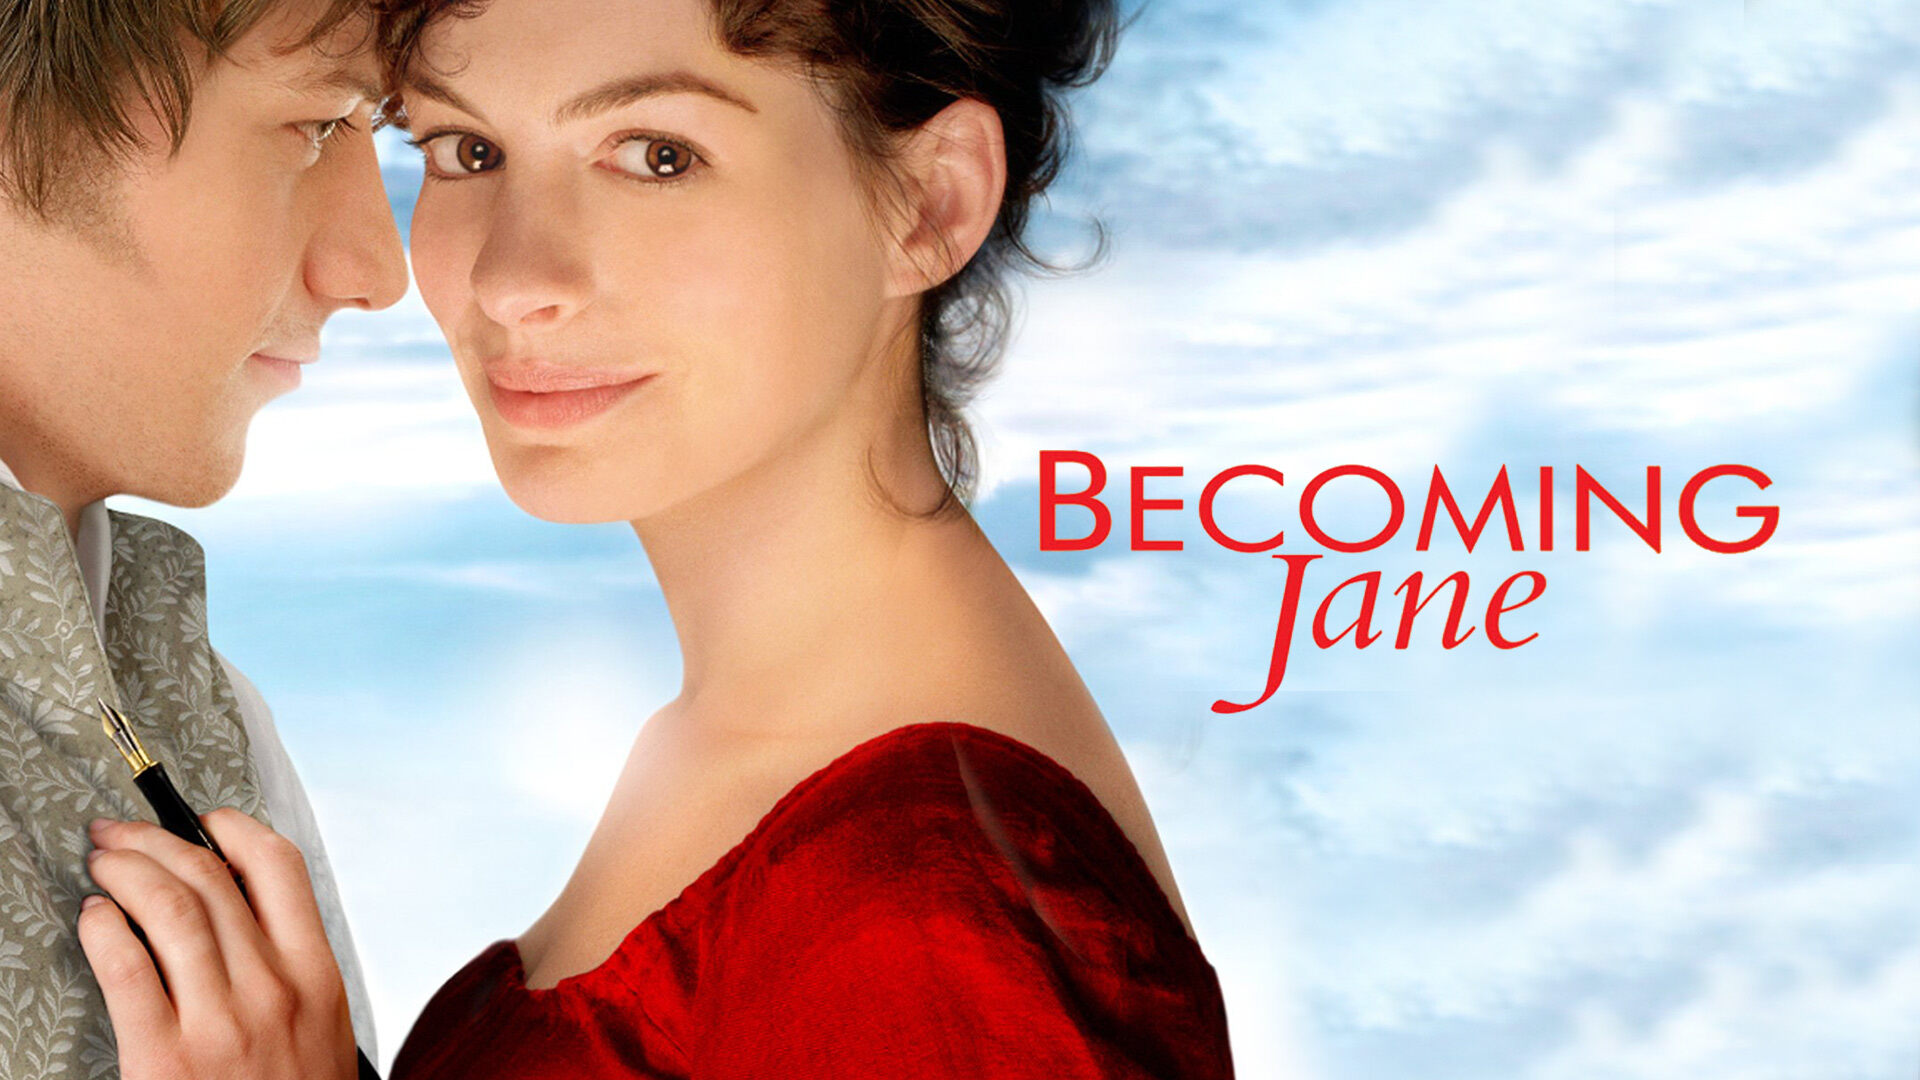 41-facts-about-the-movie-becoming-jane